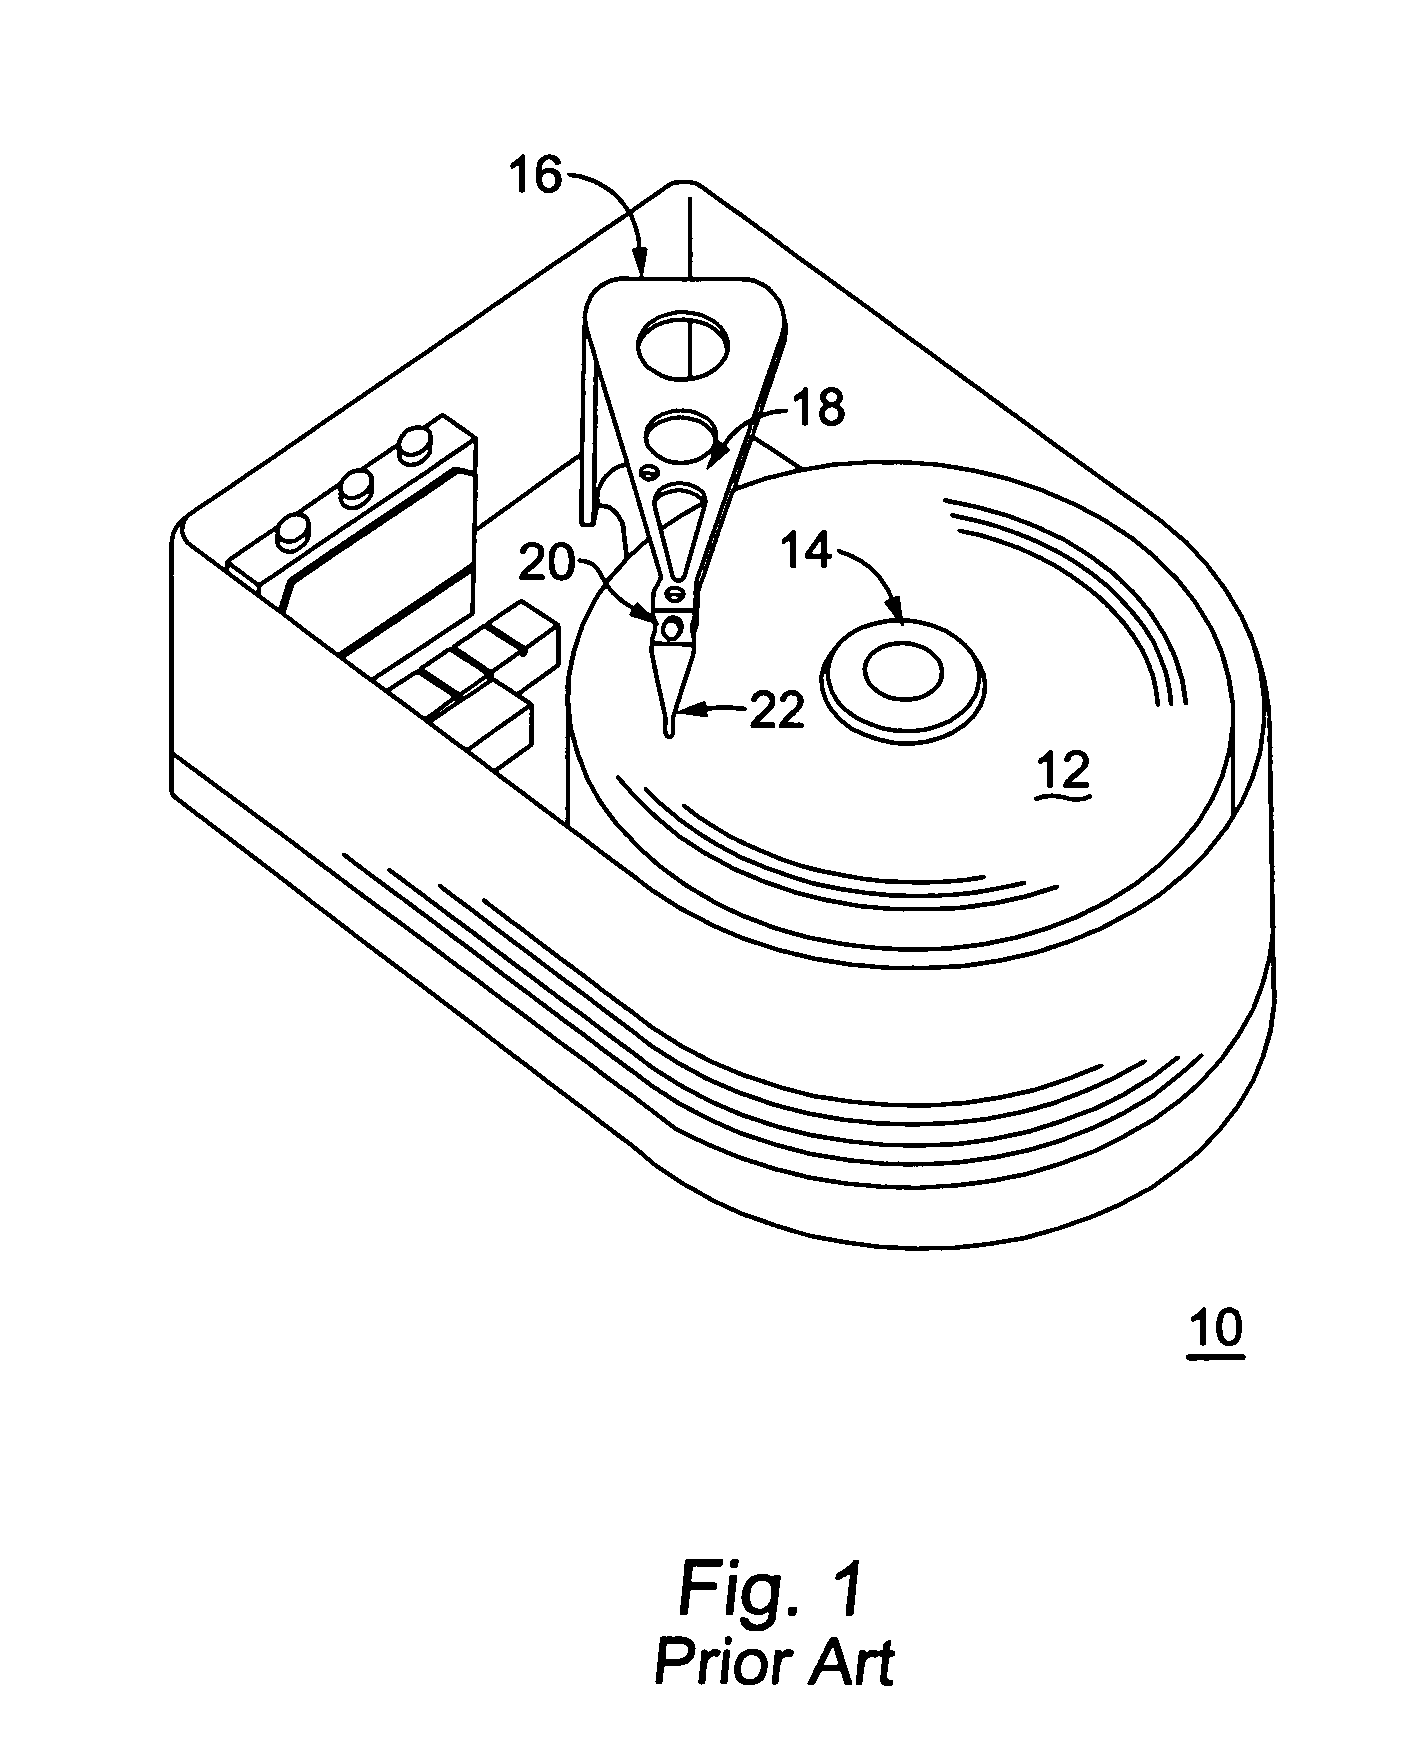 System for manufacturing a group of head gimbal assemblies (HGAs)